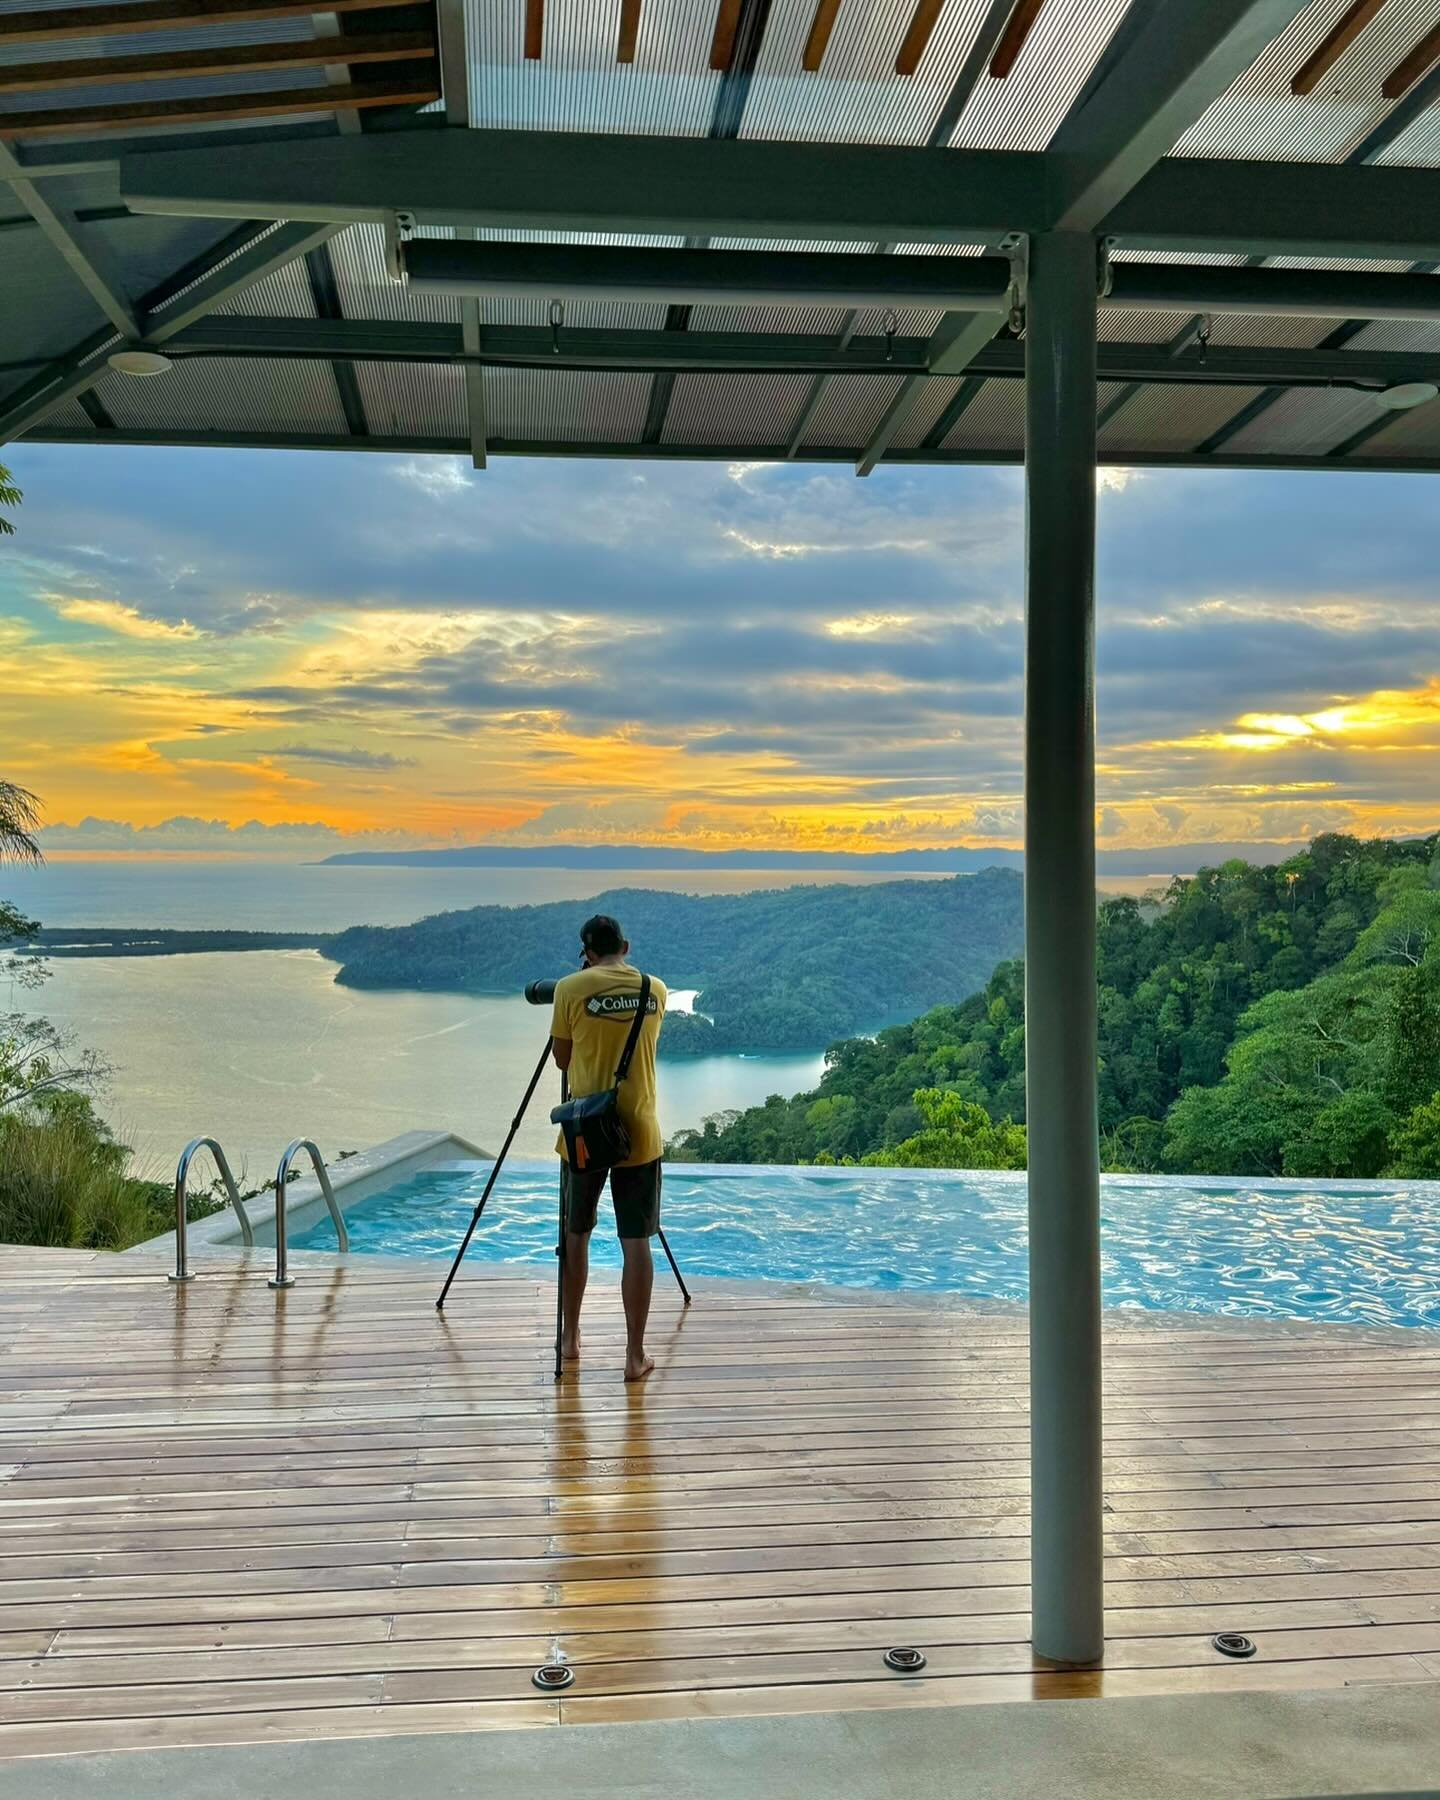 Immerse yourself in our modern rainforest lodge nestled among extraordinary wildlife, offering a unique eco-luxury experience.

Imagine staying in a private jungle bungalow where each day includes:

* Transport to local excursions accompanied by a ce